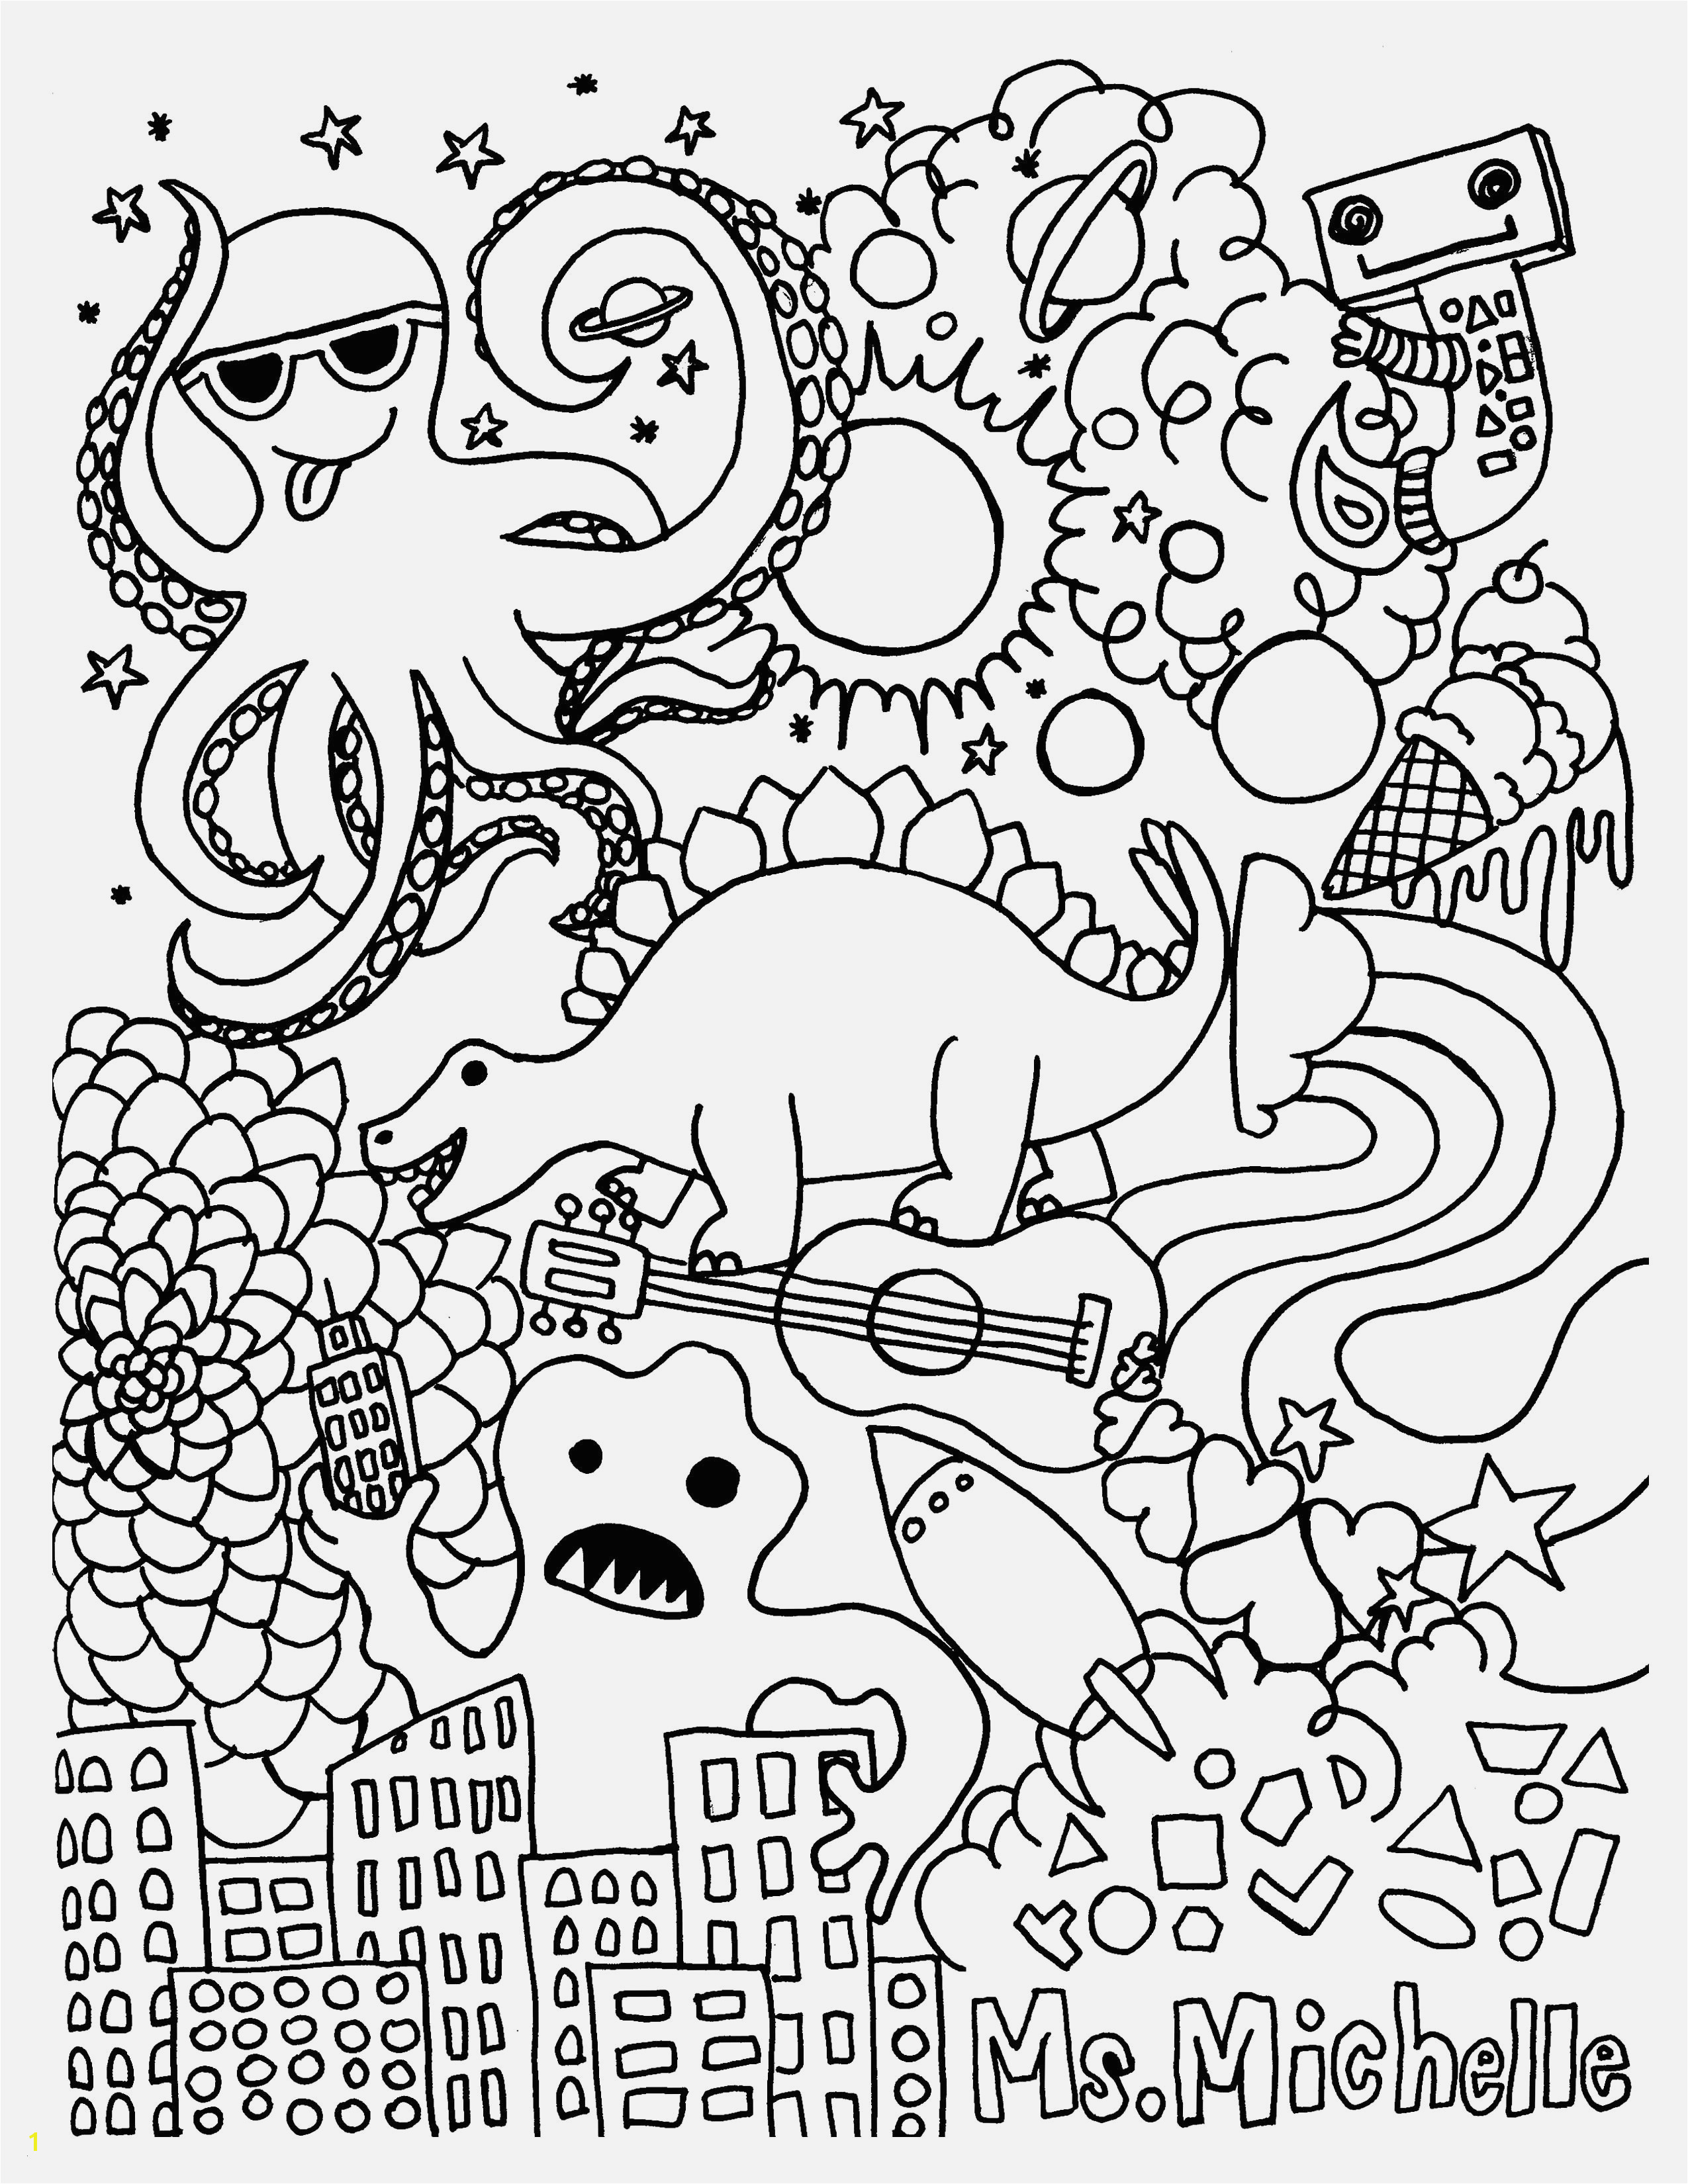 Gallery of Medusa Coloring Pages